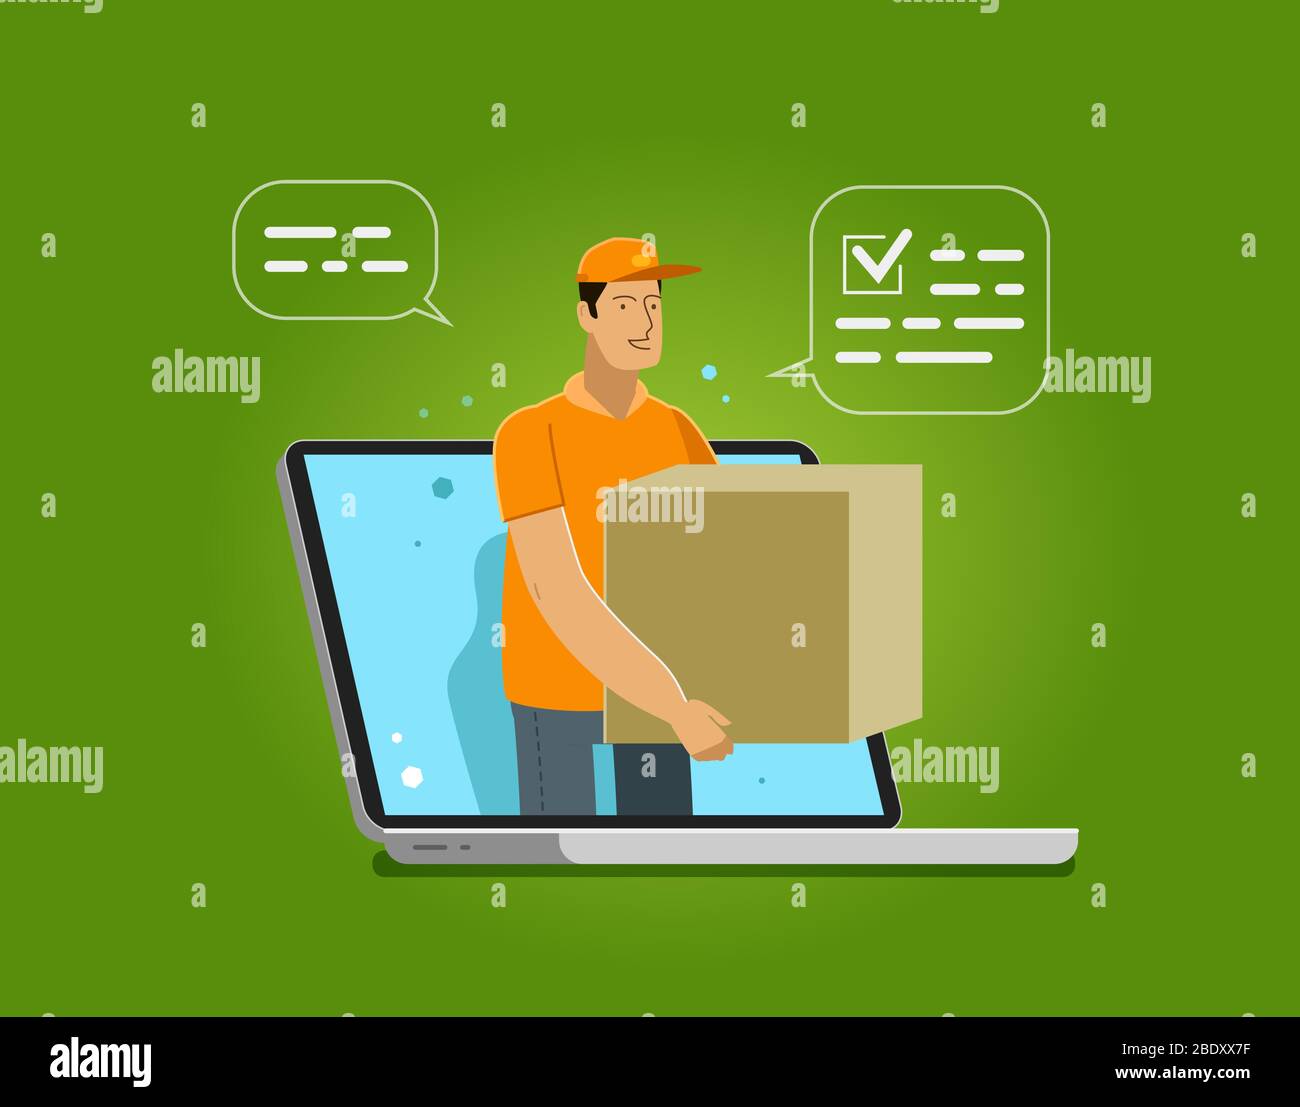 Fast delivery issued through web application on laptop. Vector illustration Stock Vector